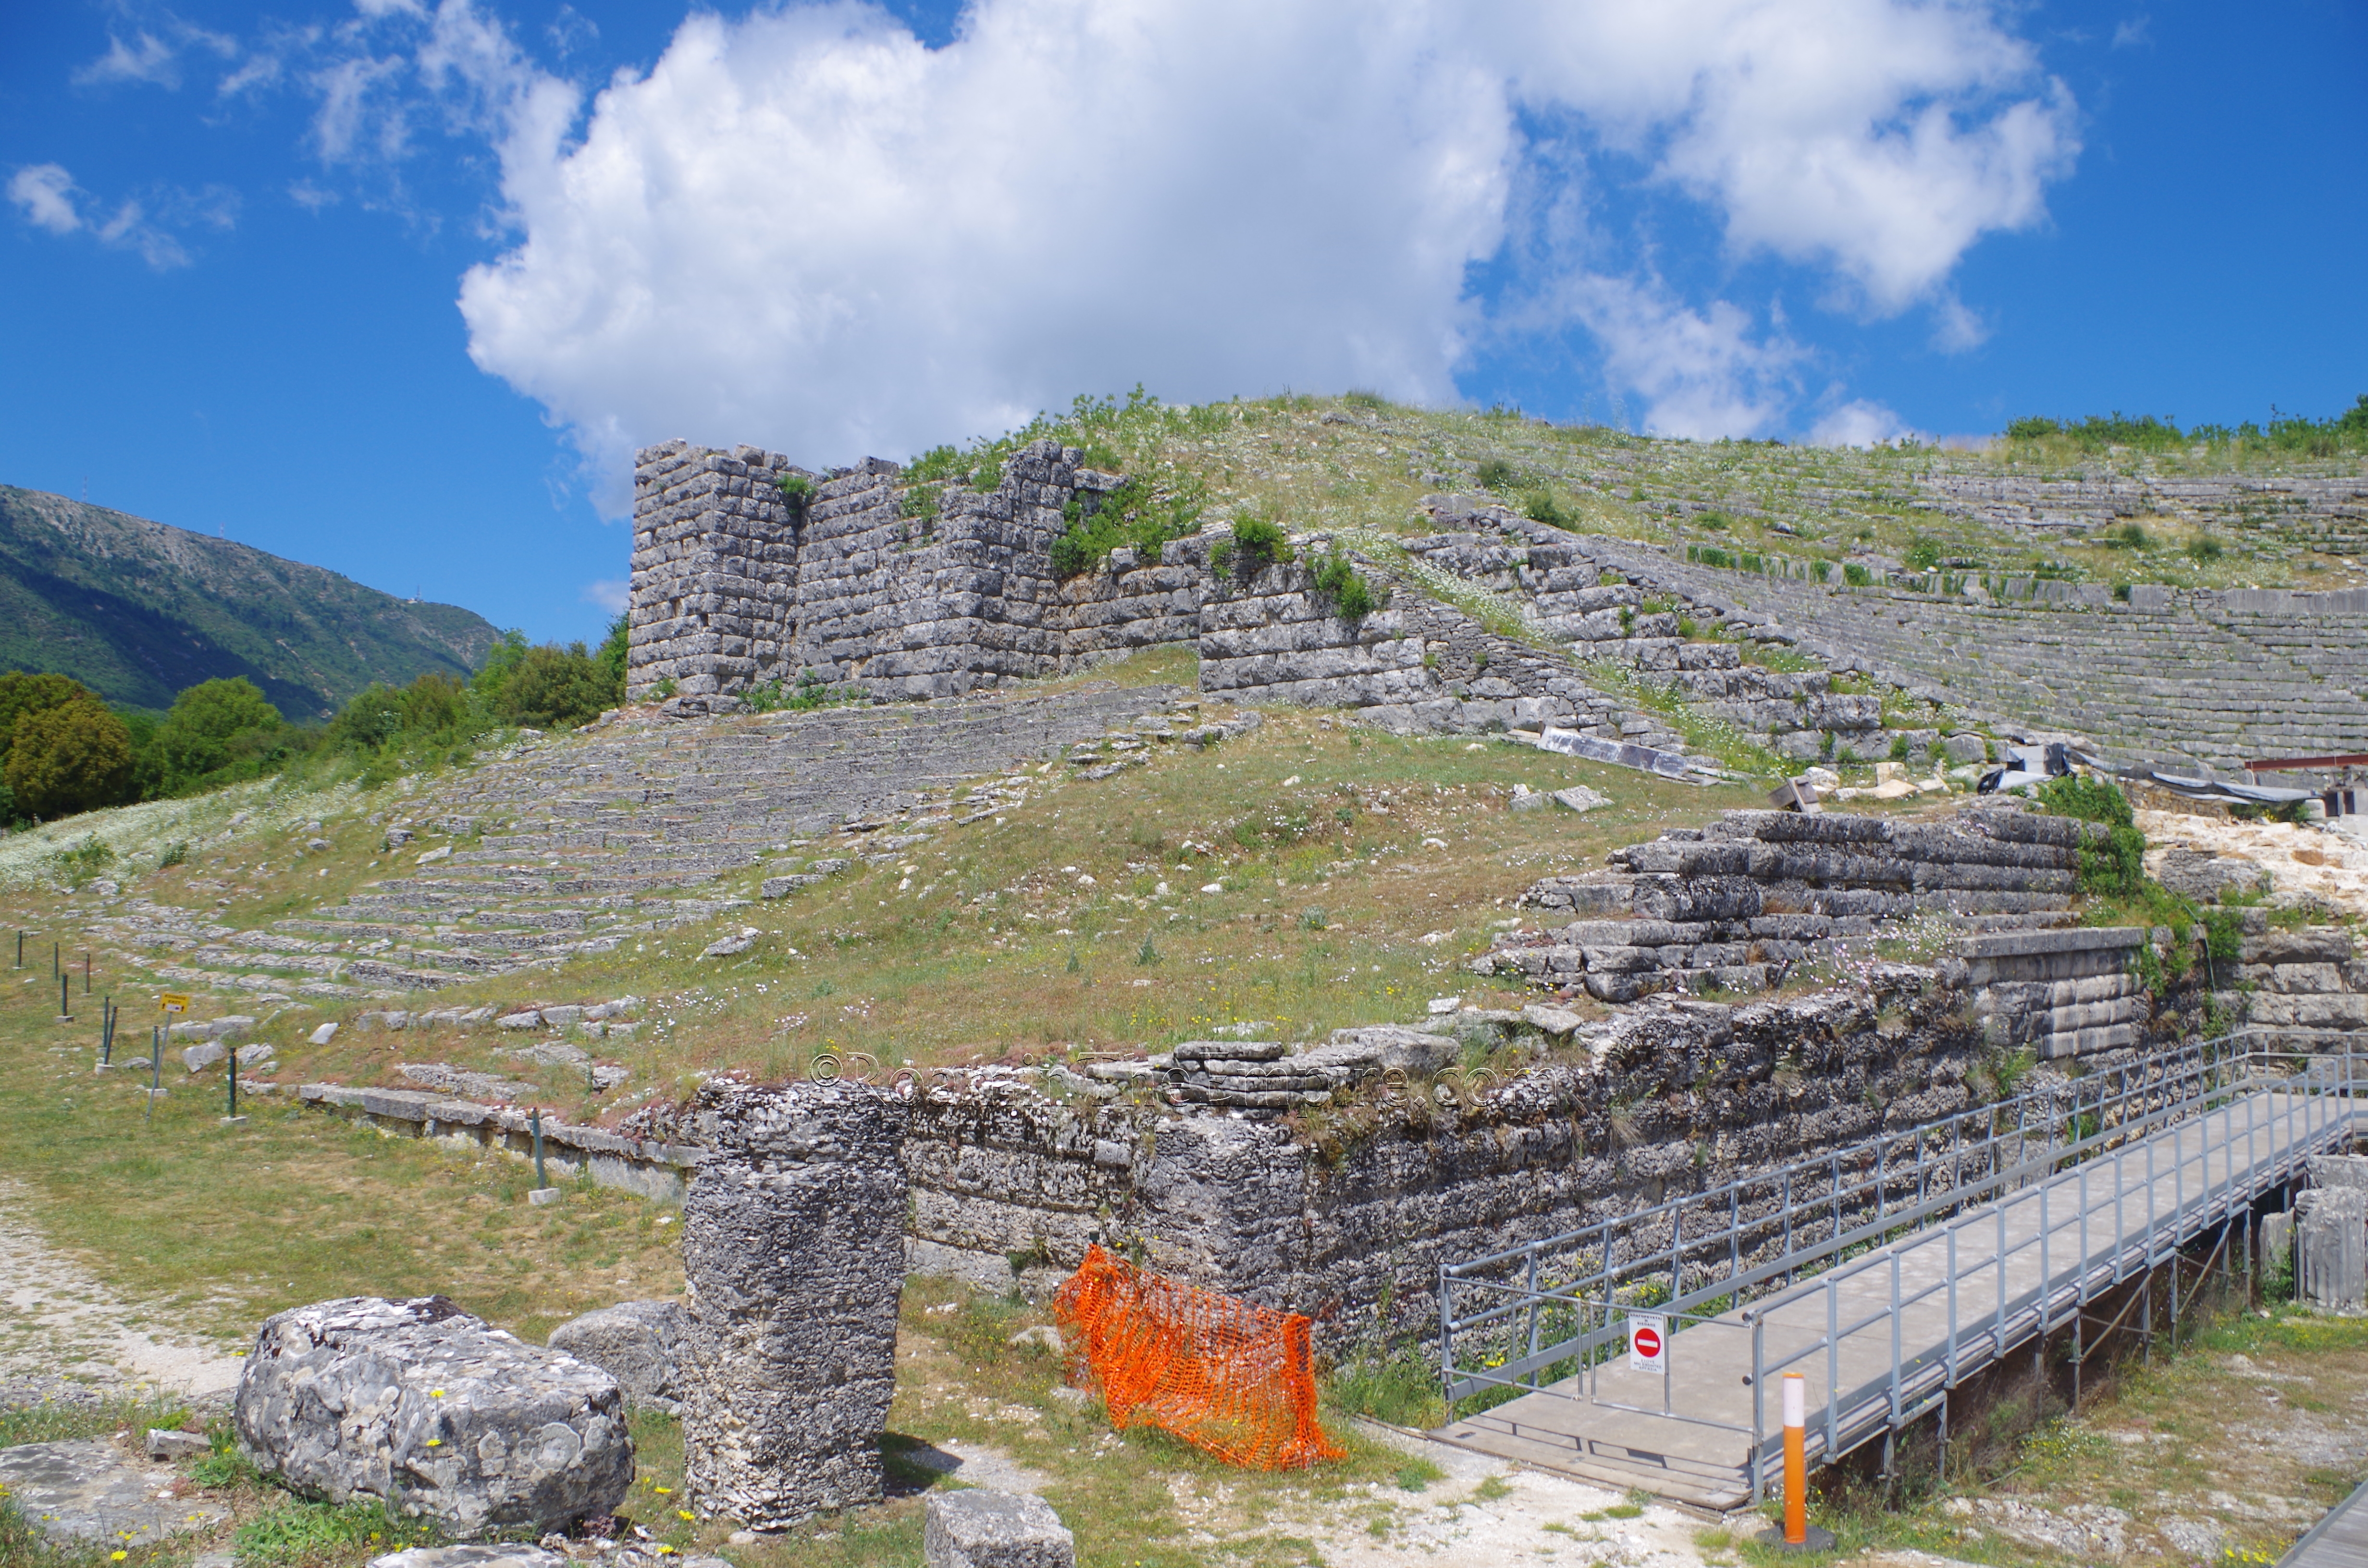 Northern seating and walls of the stadium.